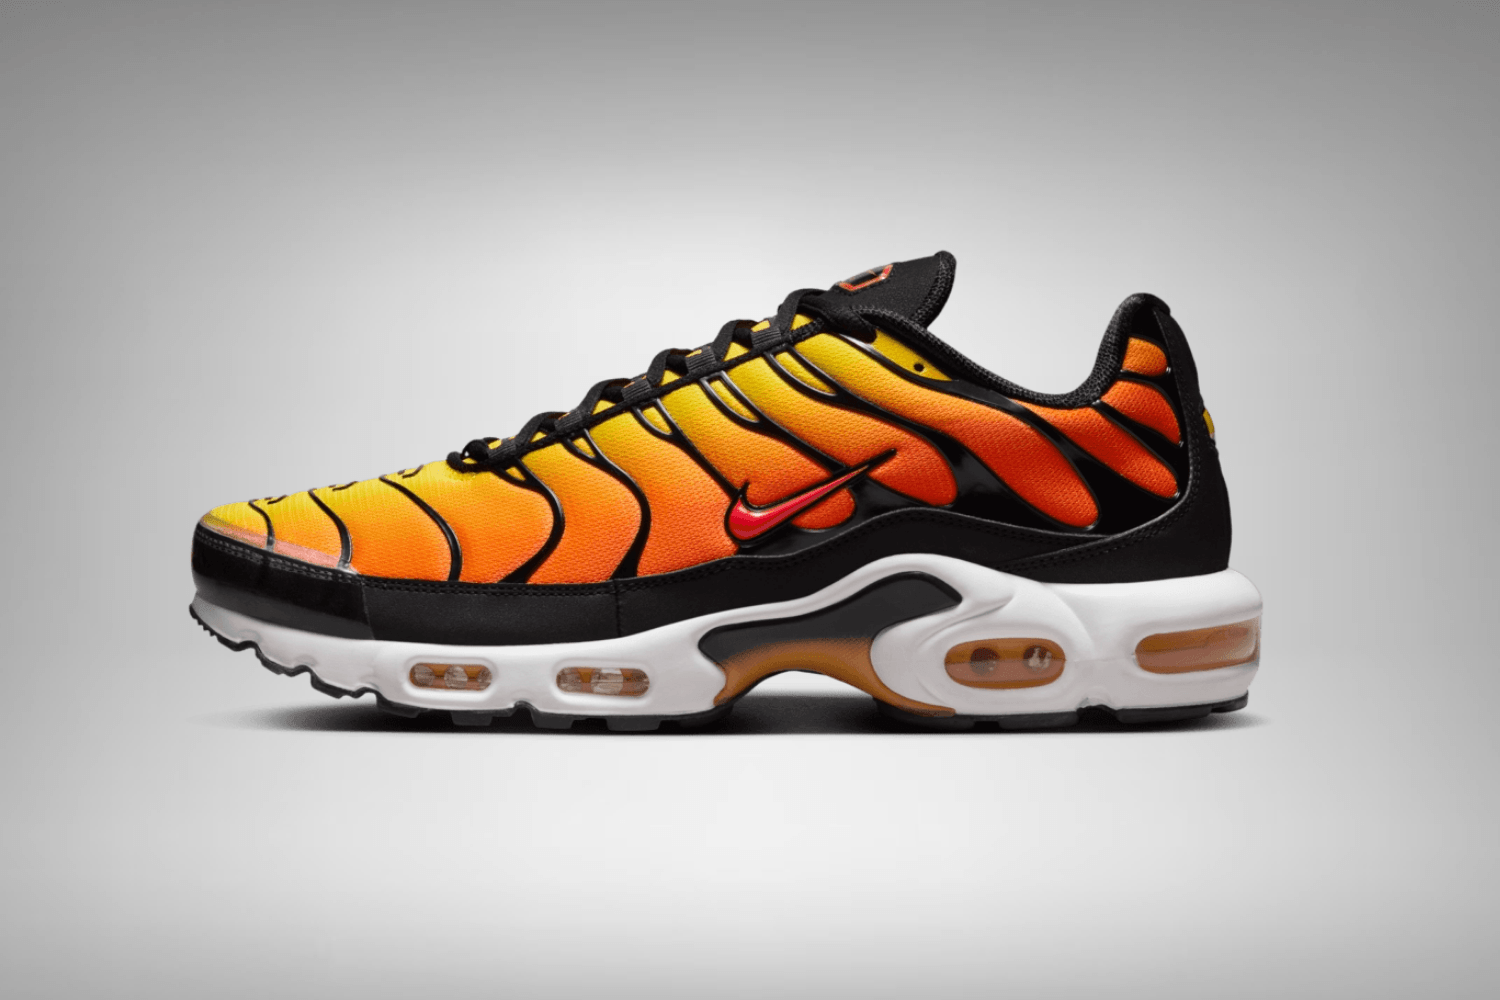 Nike reintroduces the Air Max Plus 'Sunset' in 2024